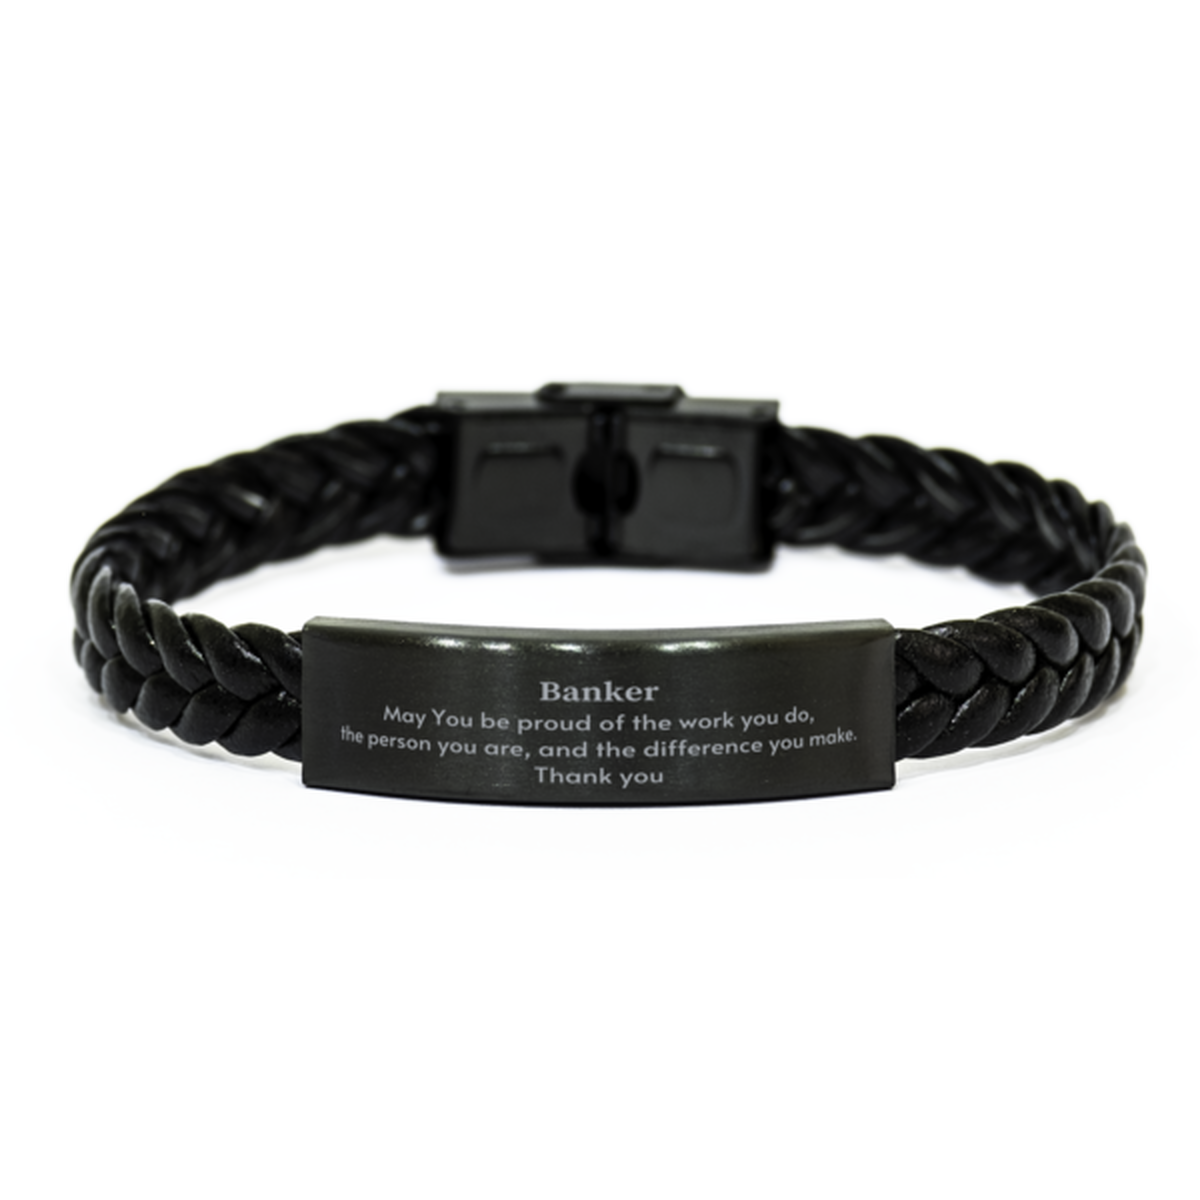 Heartwarming Braided Leather Bracelet Retirement Coworkers Gifts for Banker, Banker May You be proud of the work you do, the person you are Gifts for Boss Men Women Friends